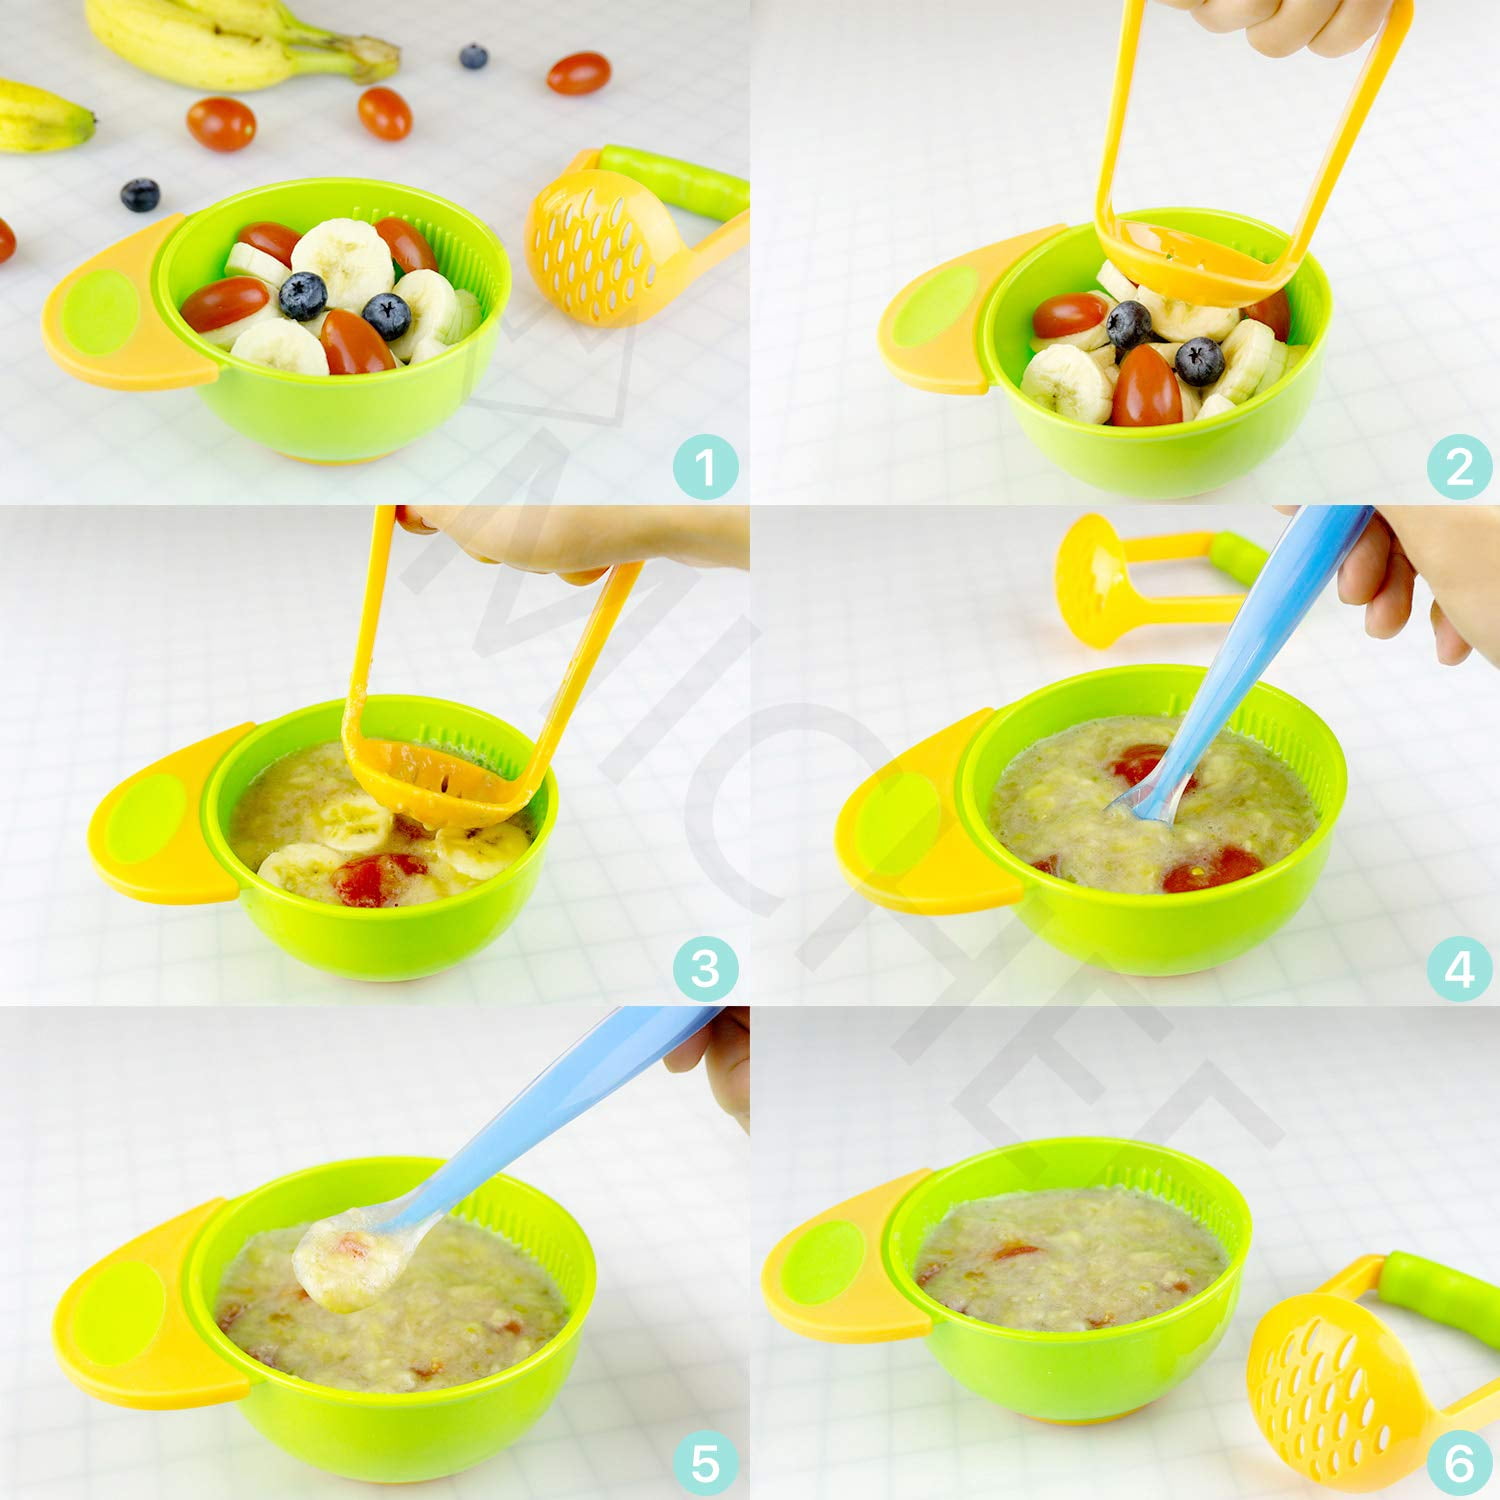 Use Fresh Food Feeders to Introduce Solid Foods to Baby